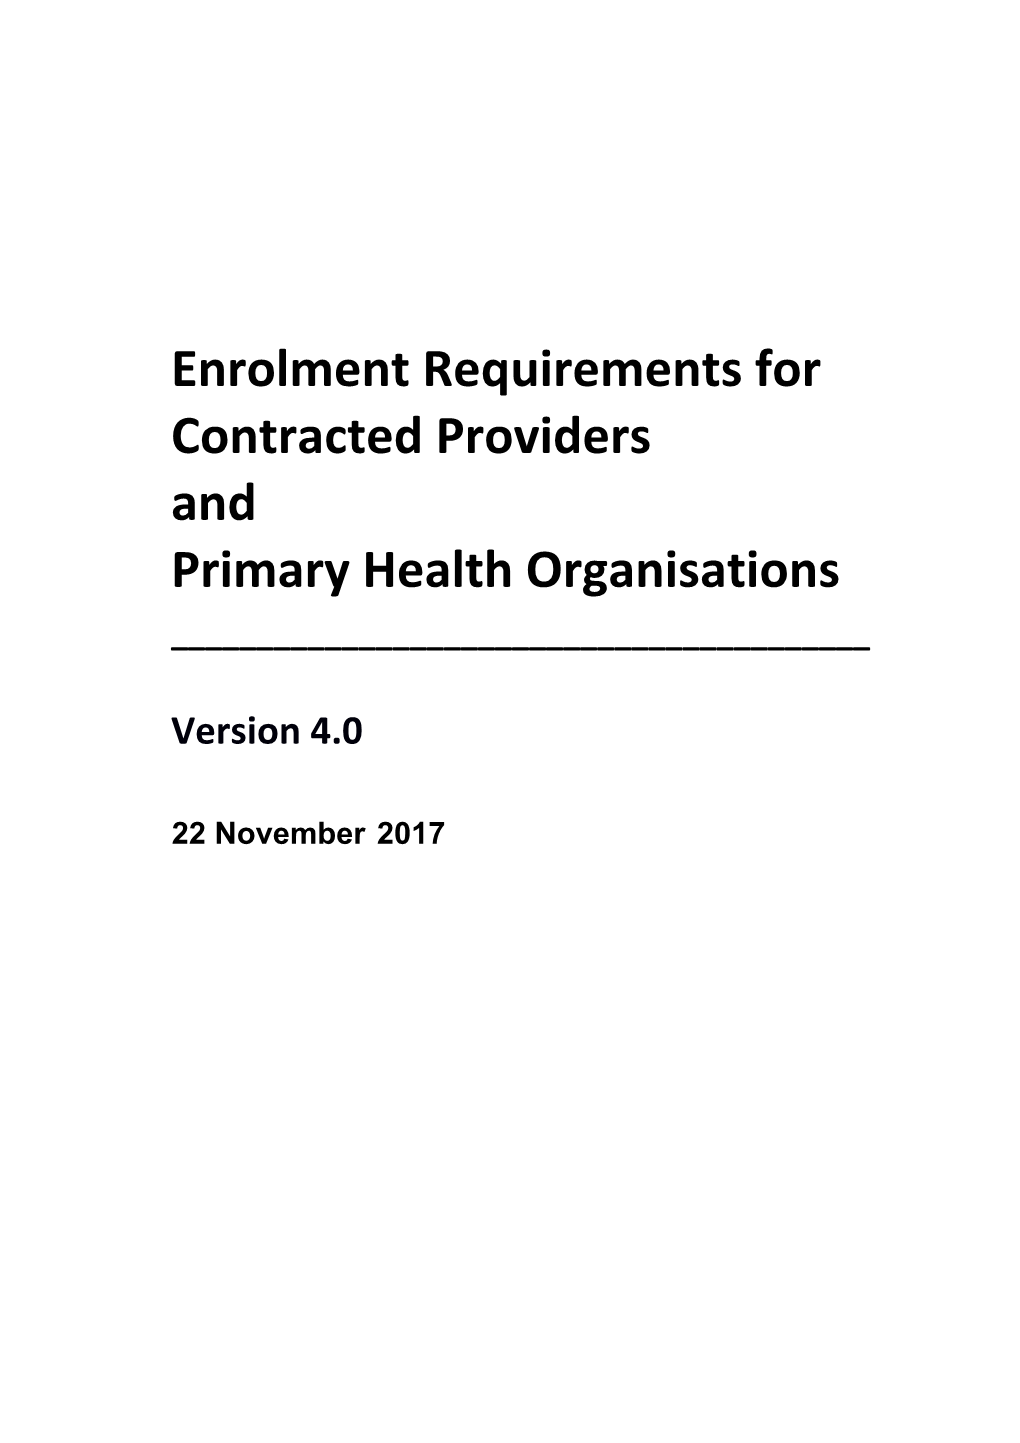 Enrolment Requirements for Contracted Providers